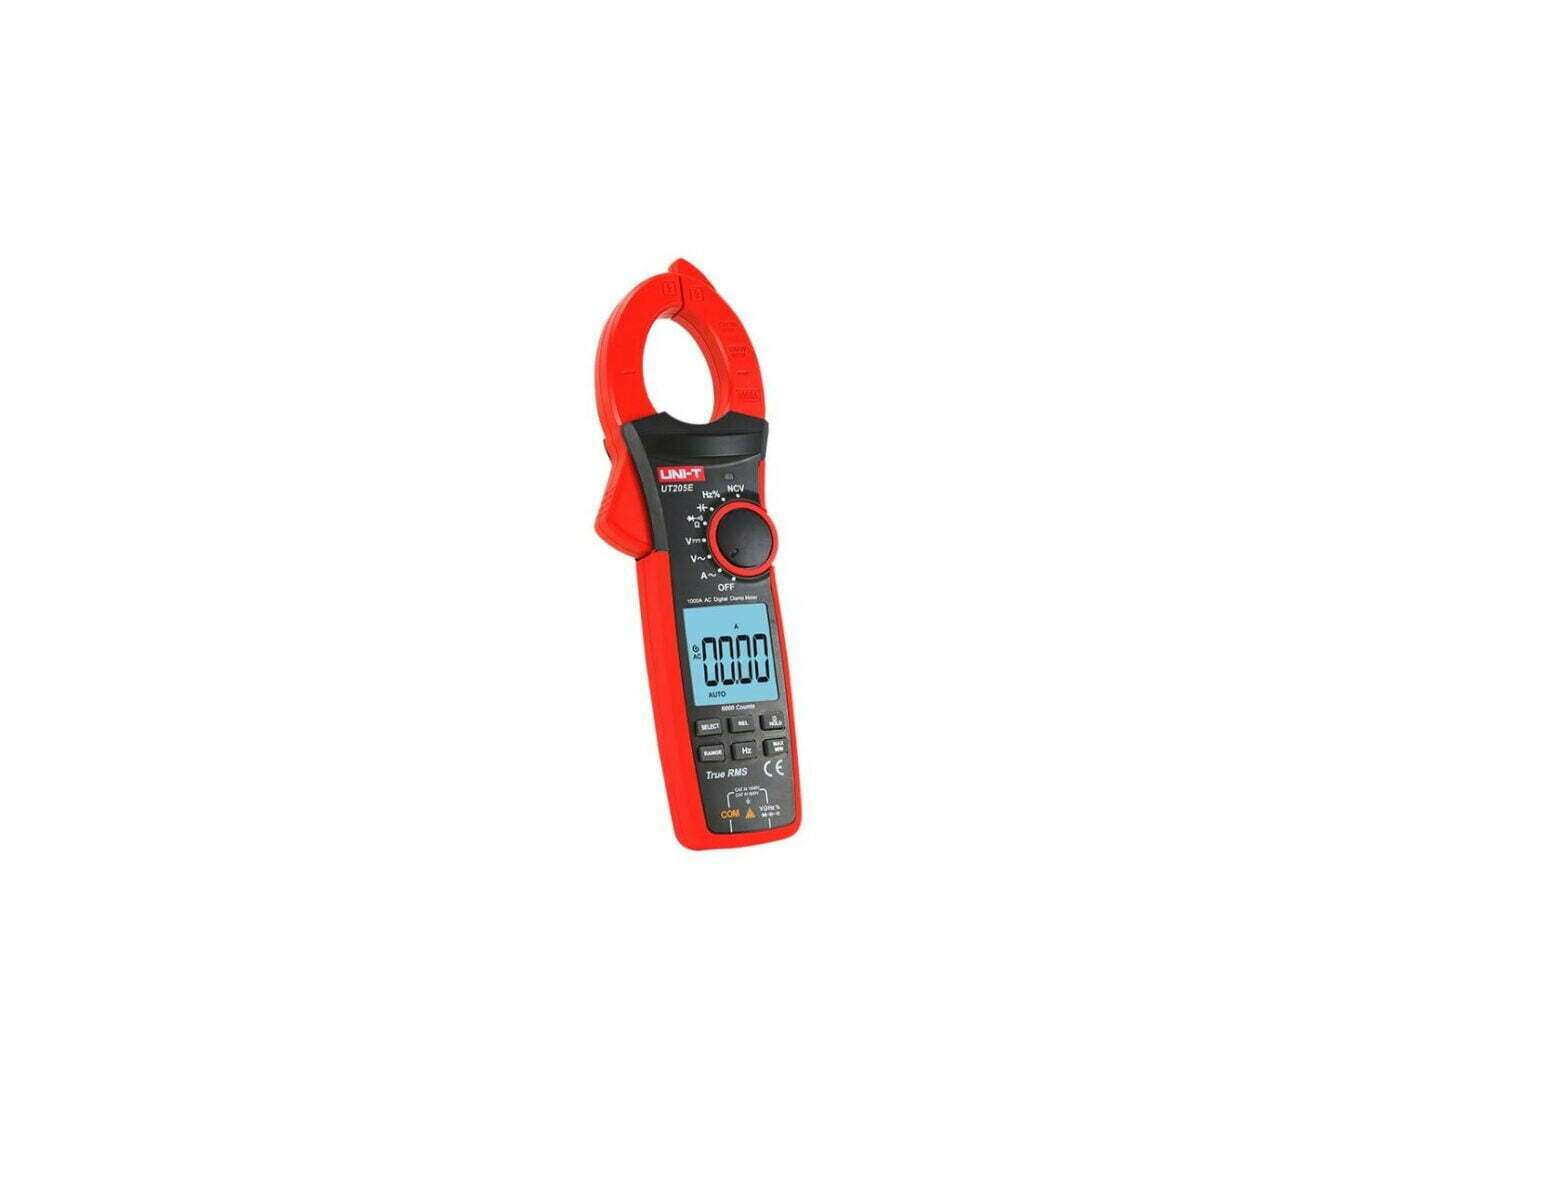 UNI-T UT205A+ 1000A Clamp Meter User Manual - Featured image